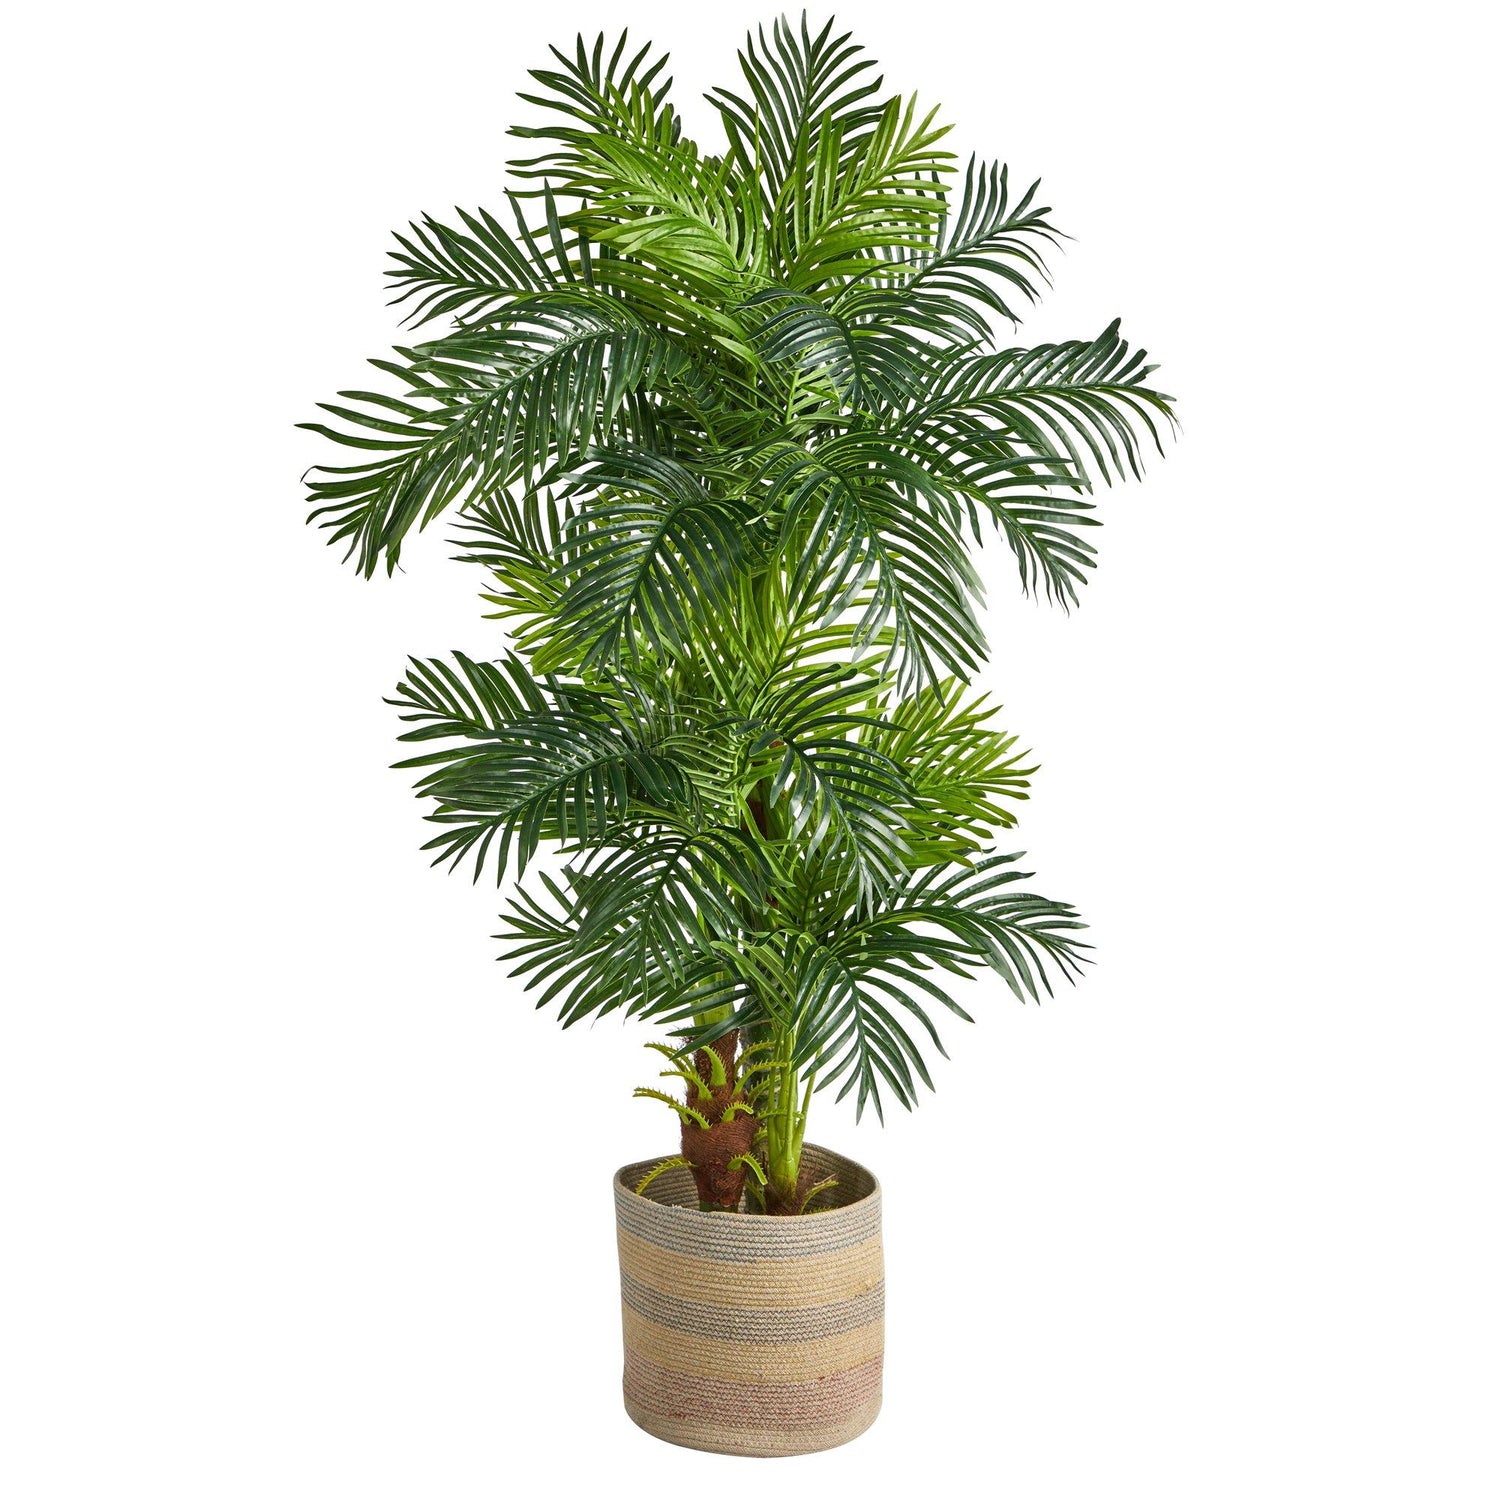 6’ Hawaii Artificial Palm Tree in Handmade Natural Cotton Multicolored Woven Planter